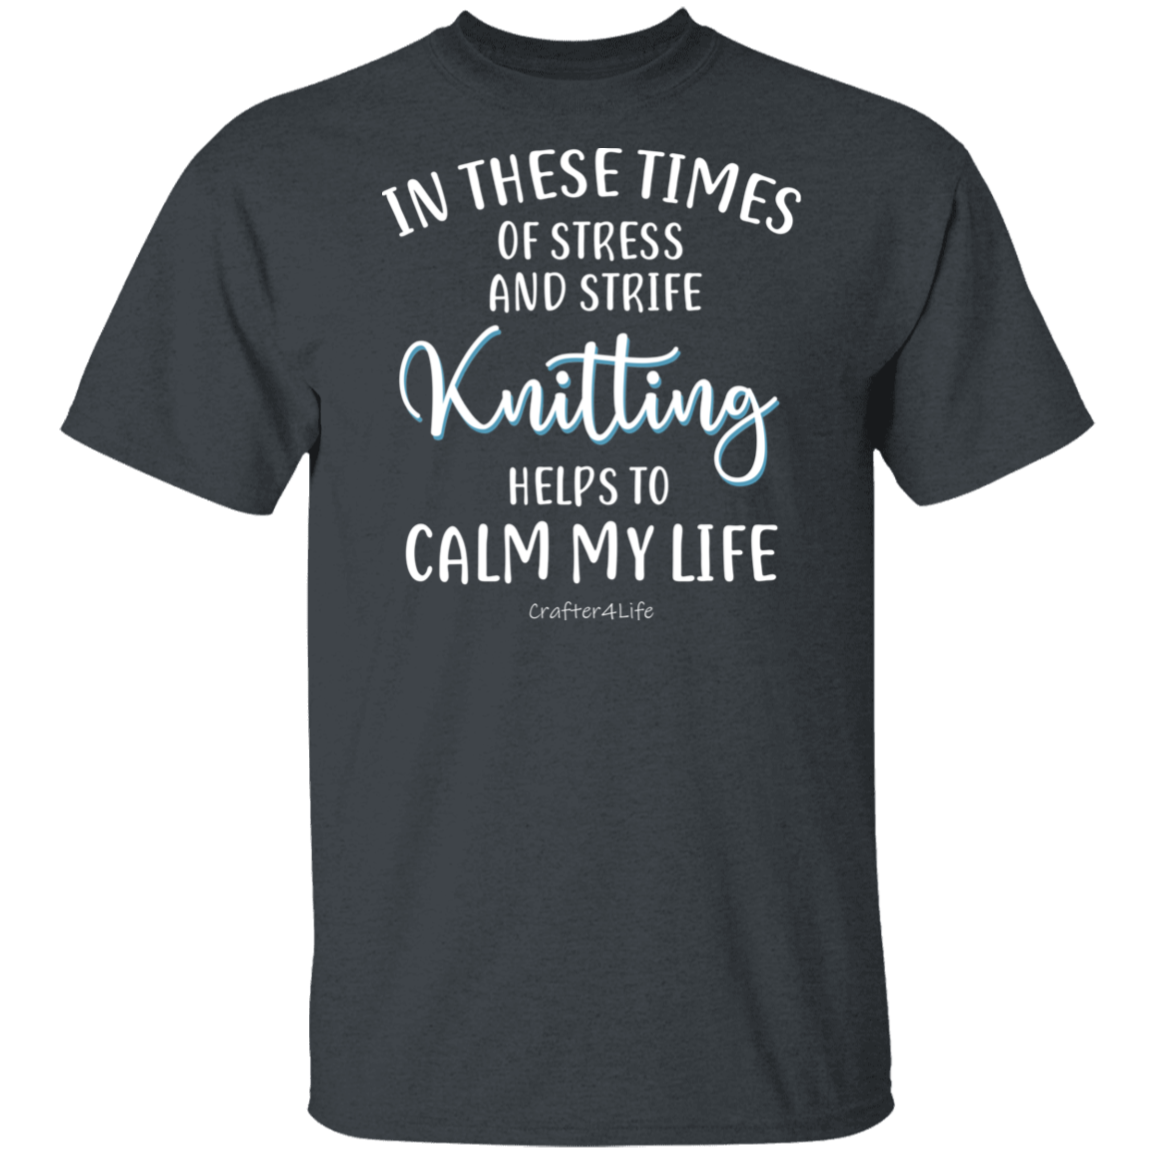 Knitting Helps to Calm My Life T-Shirt